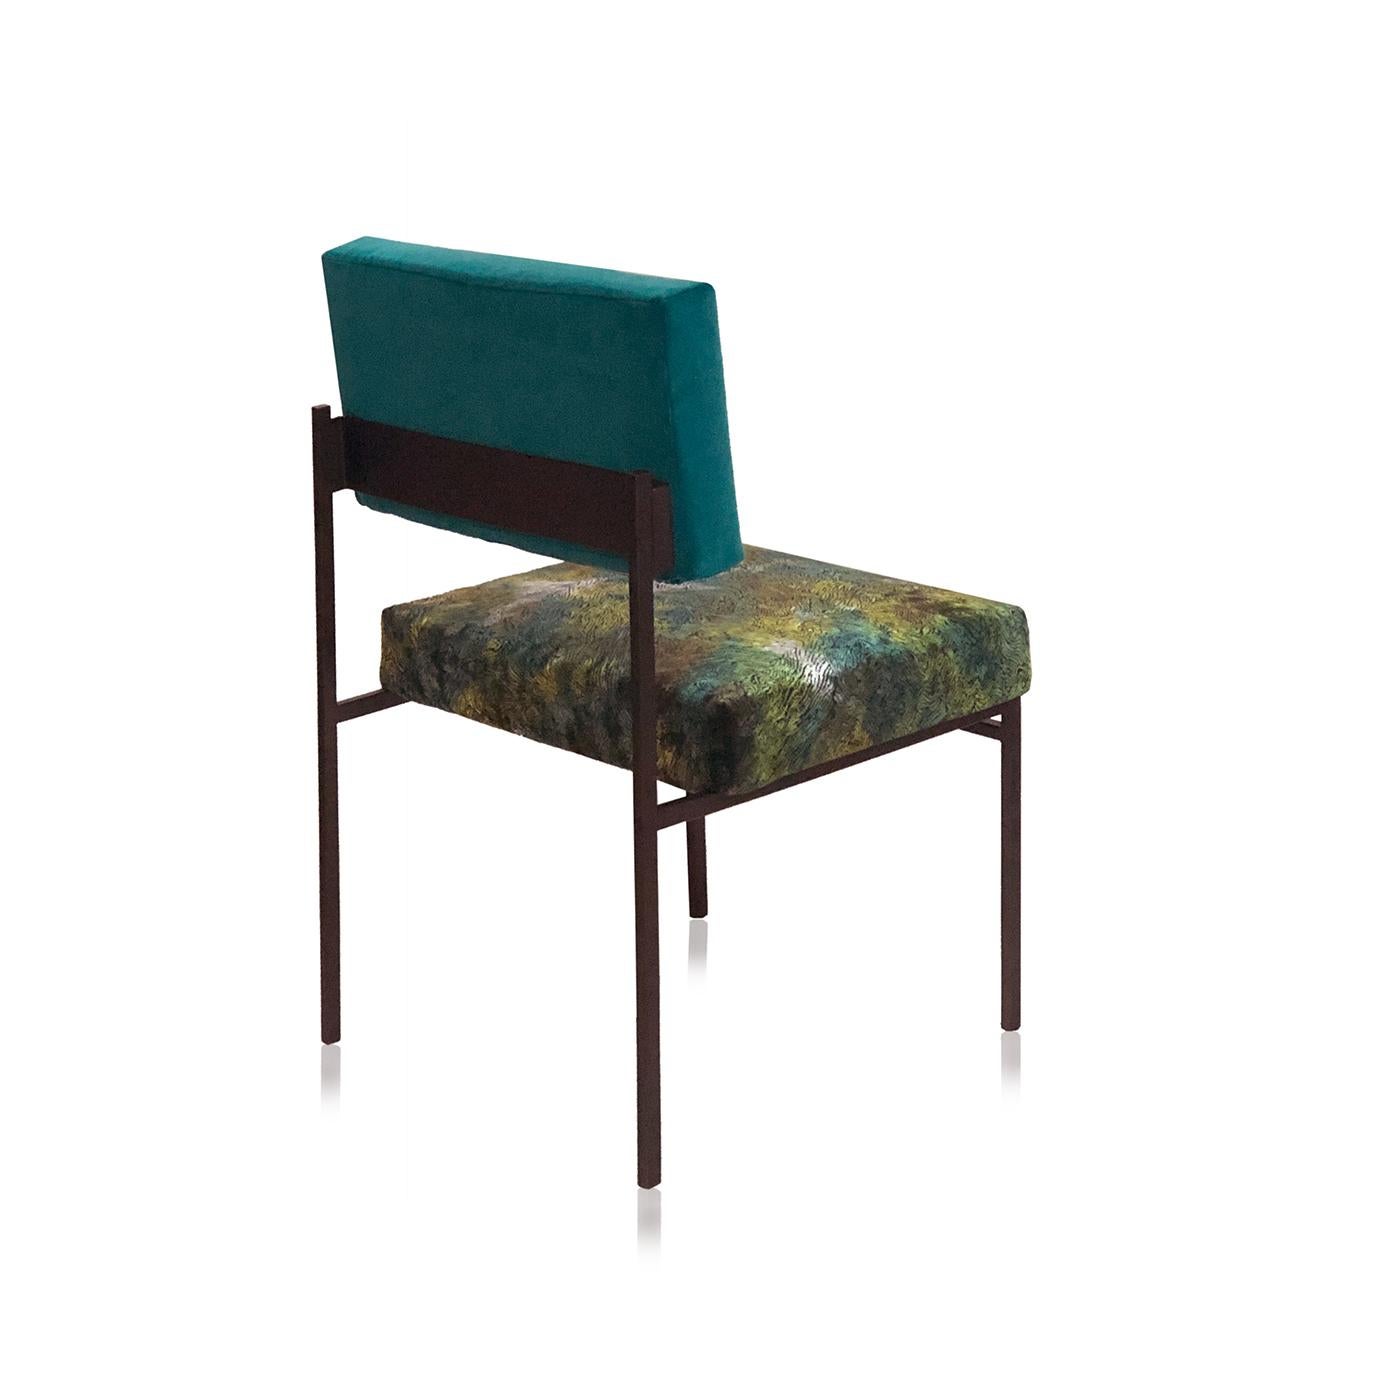 Perfect for relaxing into a great conversation, the Aurea Green Velvet Chair by CtrlZak and Davide Barzaghi is the ultimate in comfort. With its 50s retro appeal, this top selling item to restaurants and hotels is designed with clean, bold lines.